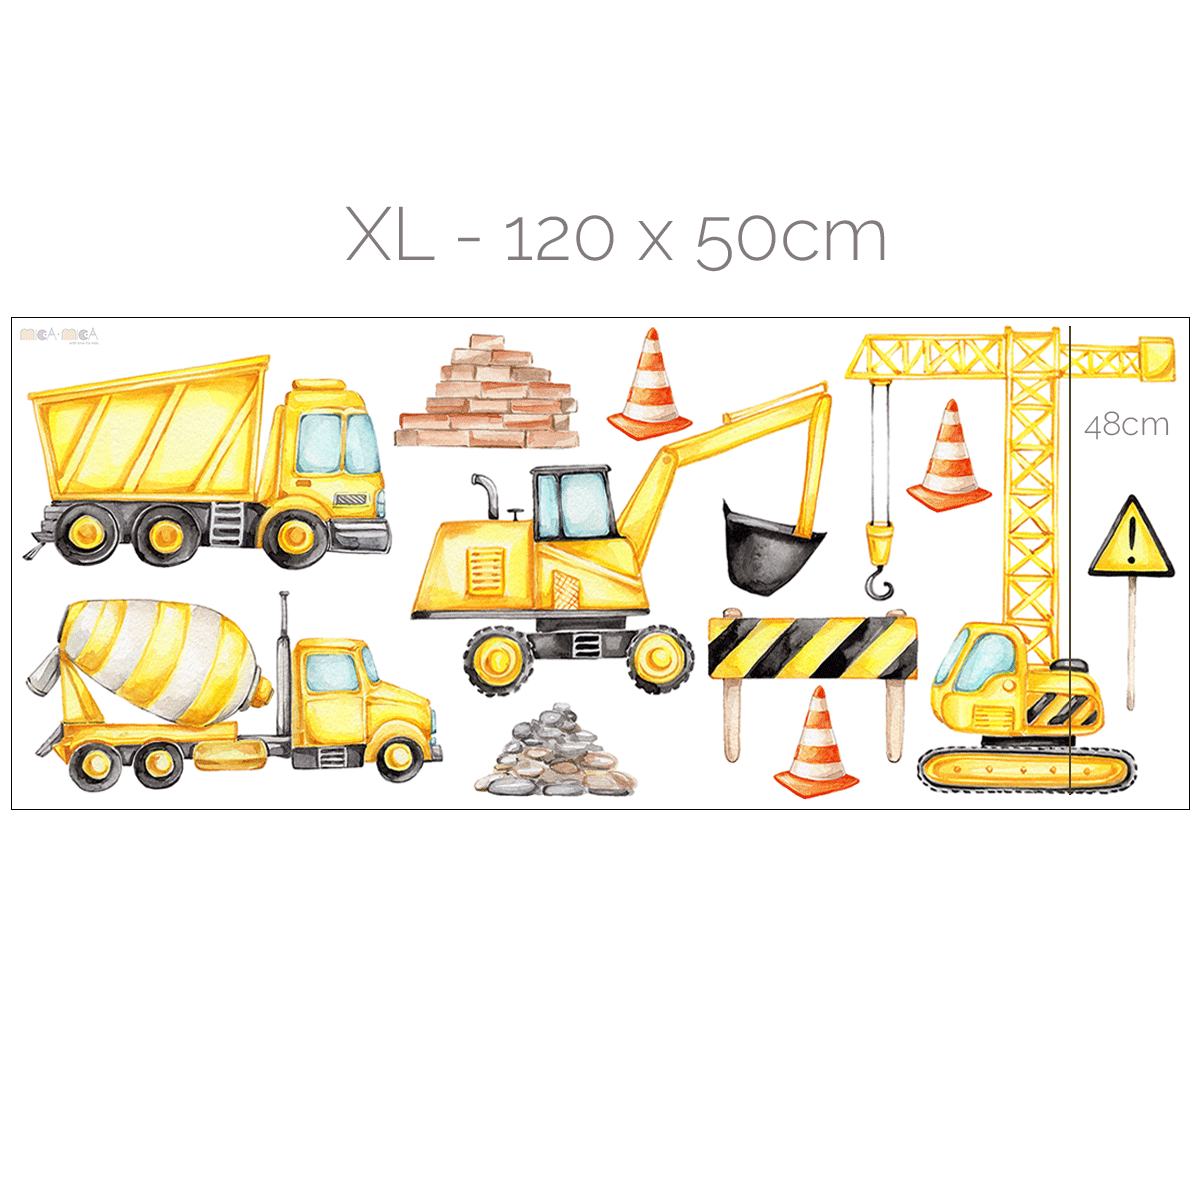 King size construction wall stickers